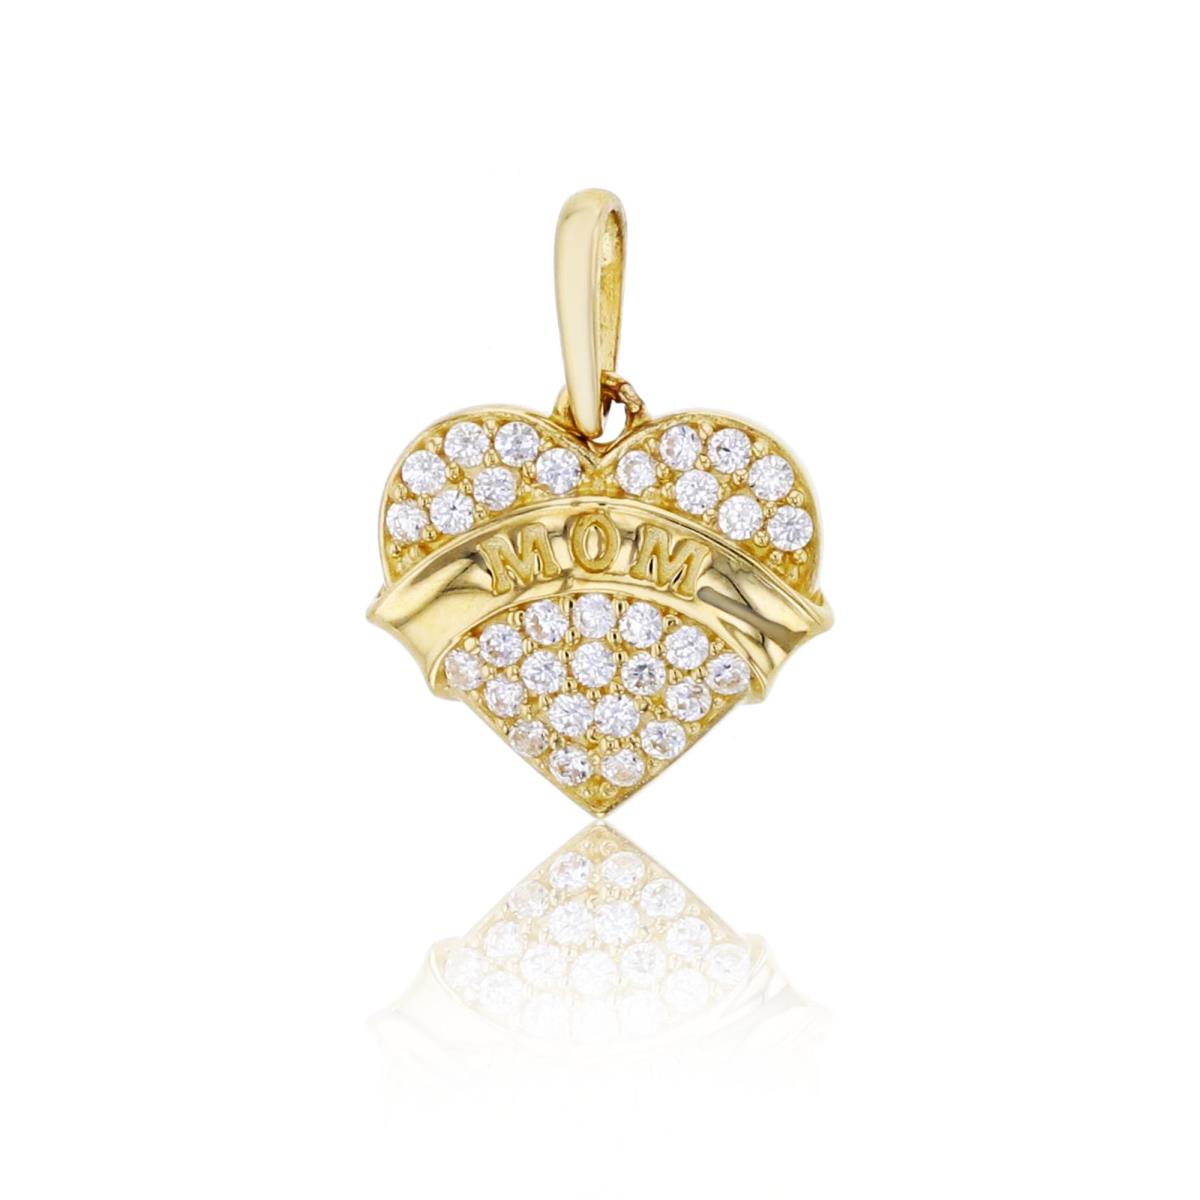 14K Yellow Gold 14x10mm Micropave CZ Heart with Engraved "MOM" Pendant